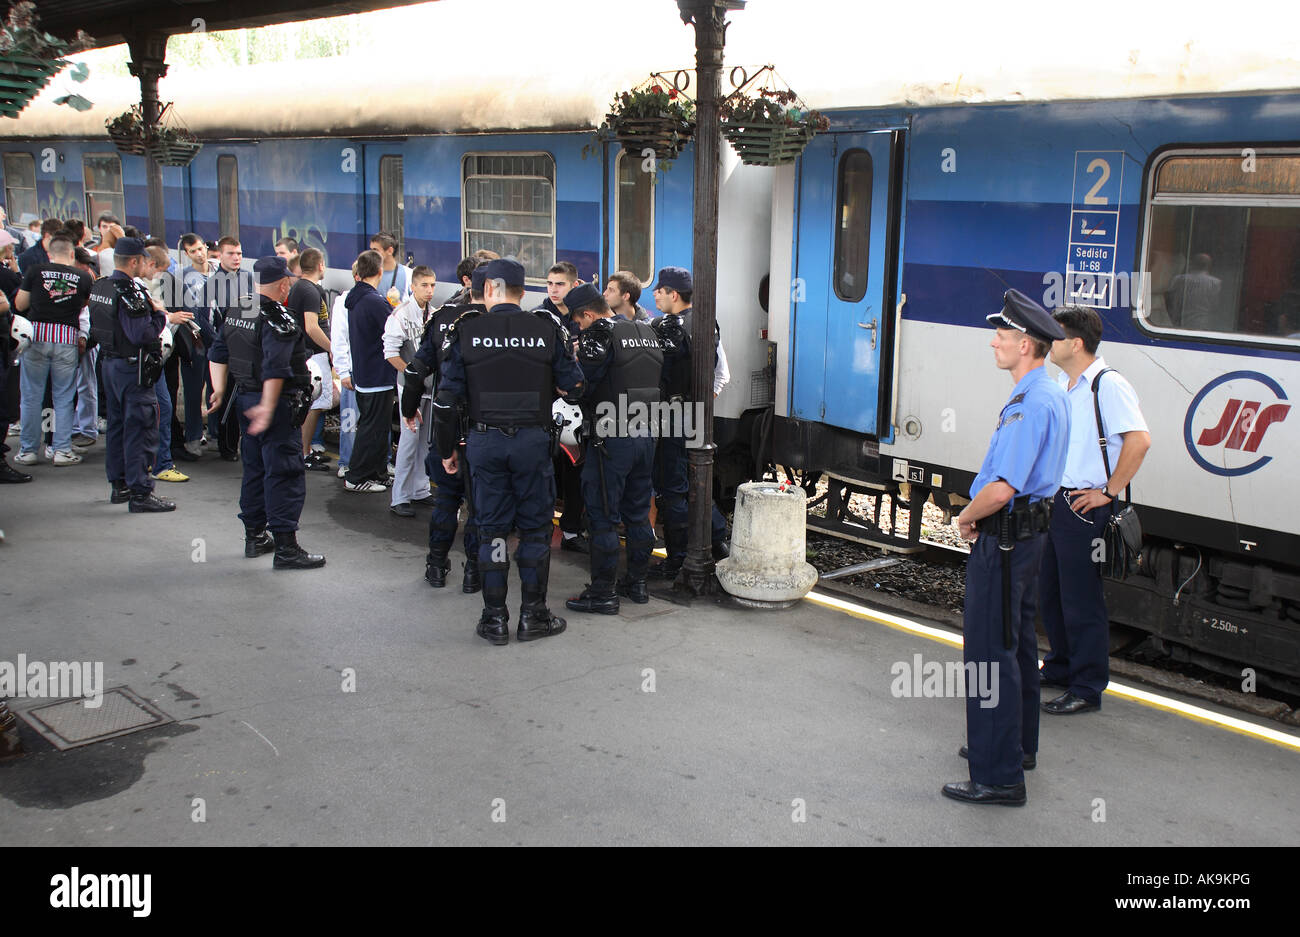 red star belgrade football fans board a train at belgrade station surronded by serbian police Stock Photo